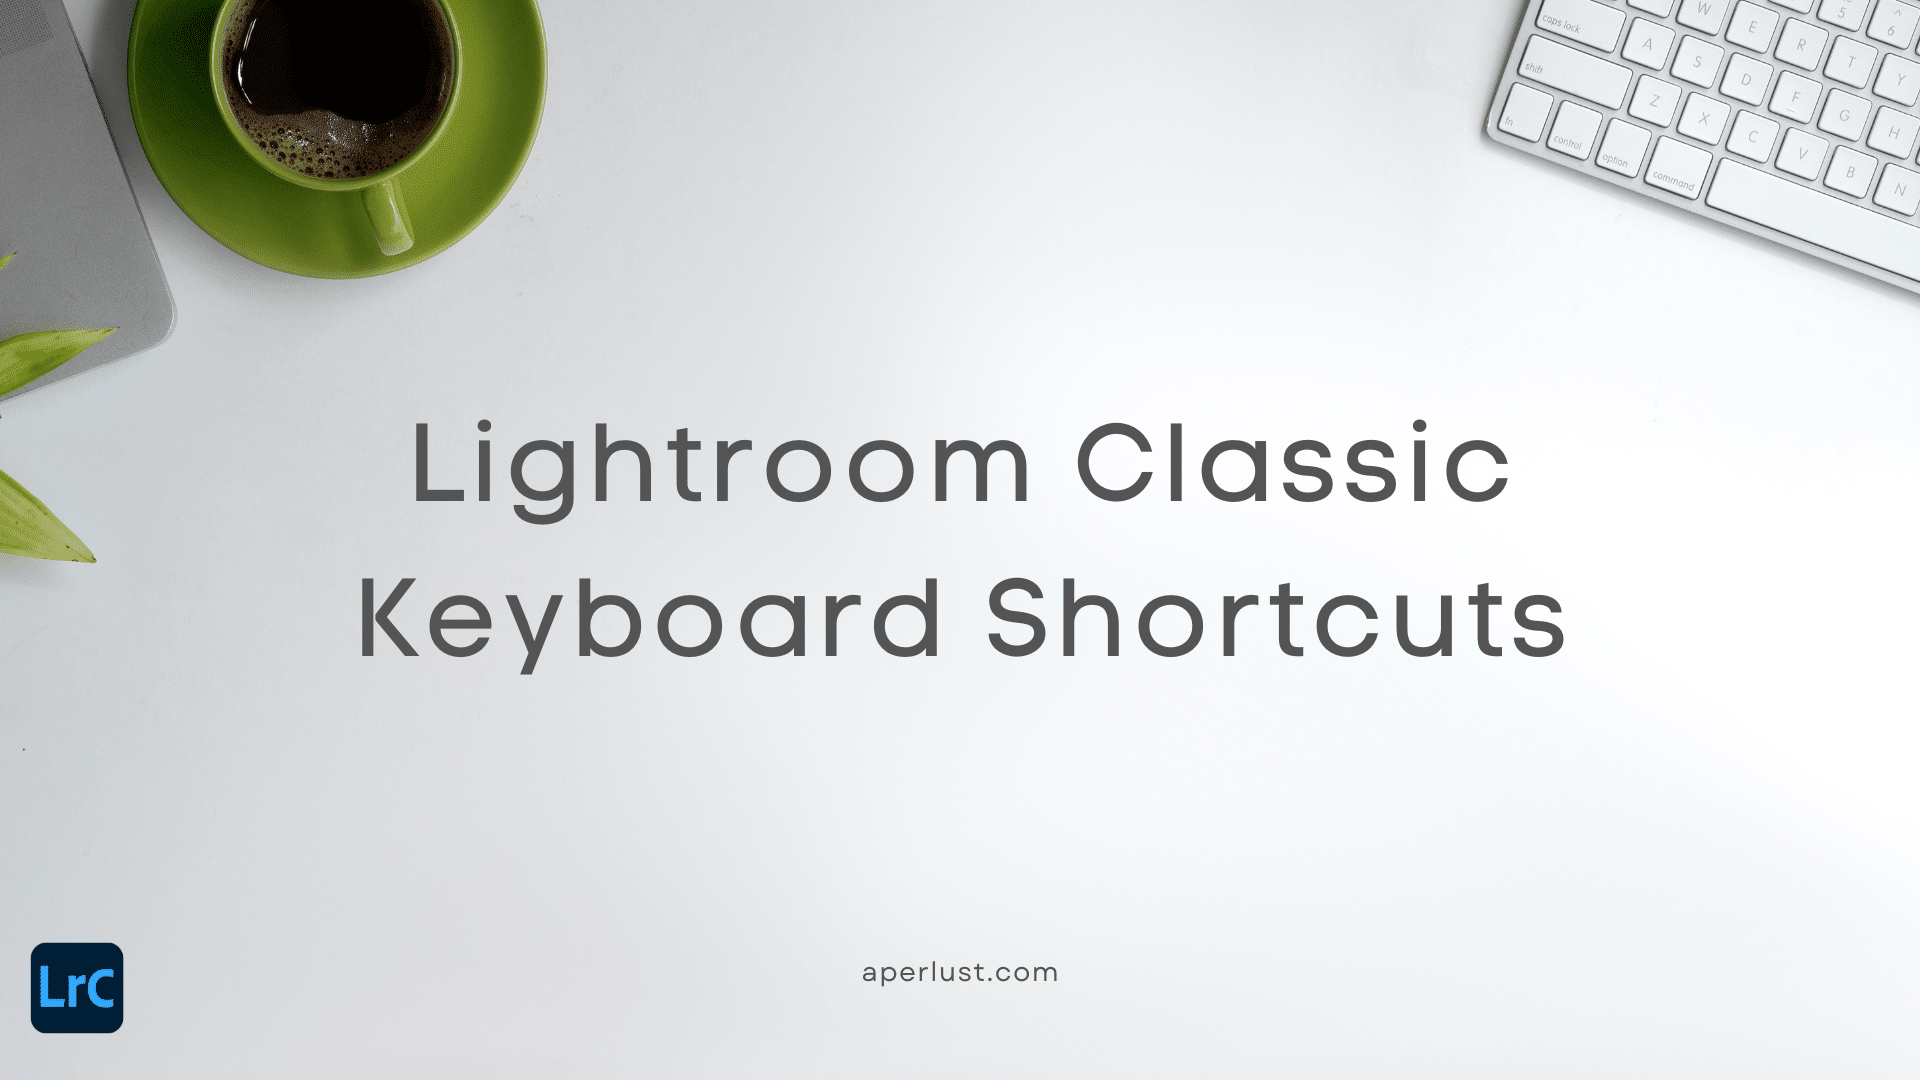 Lightroom Classic Keyboard Shortcuts for Mac and Windows